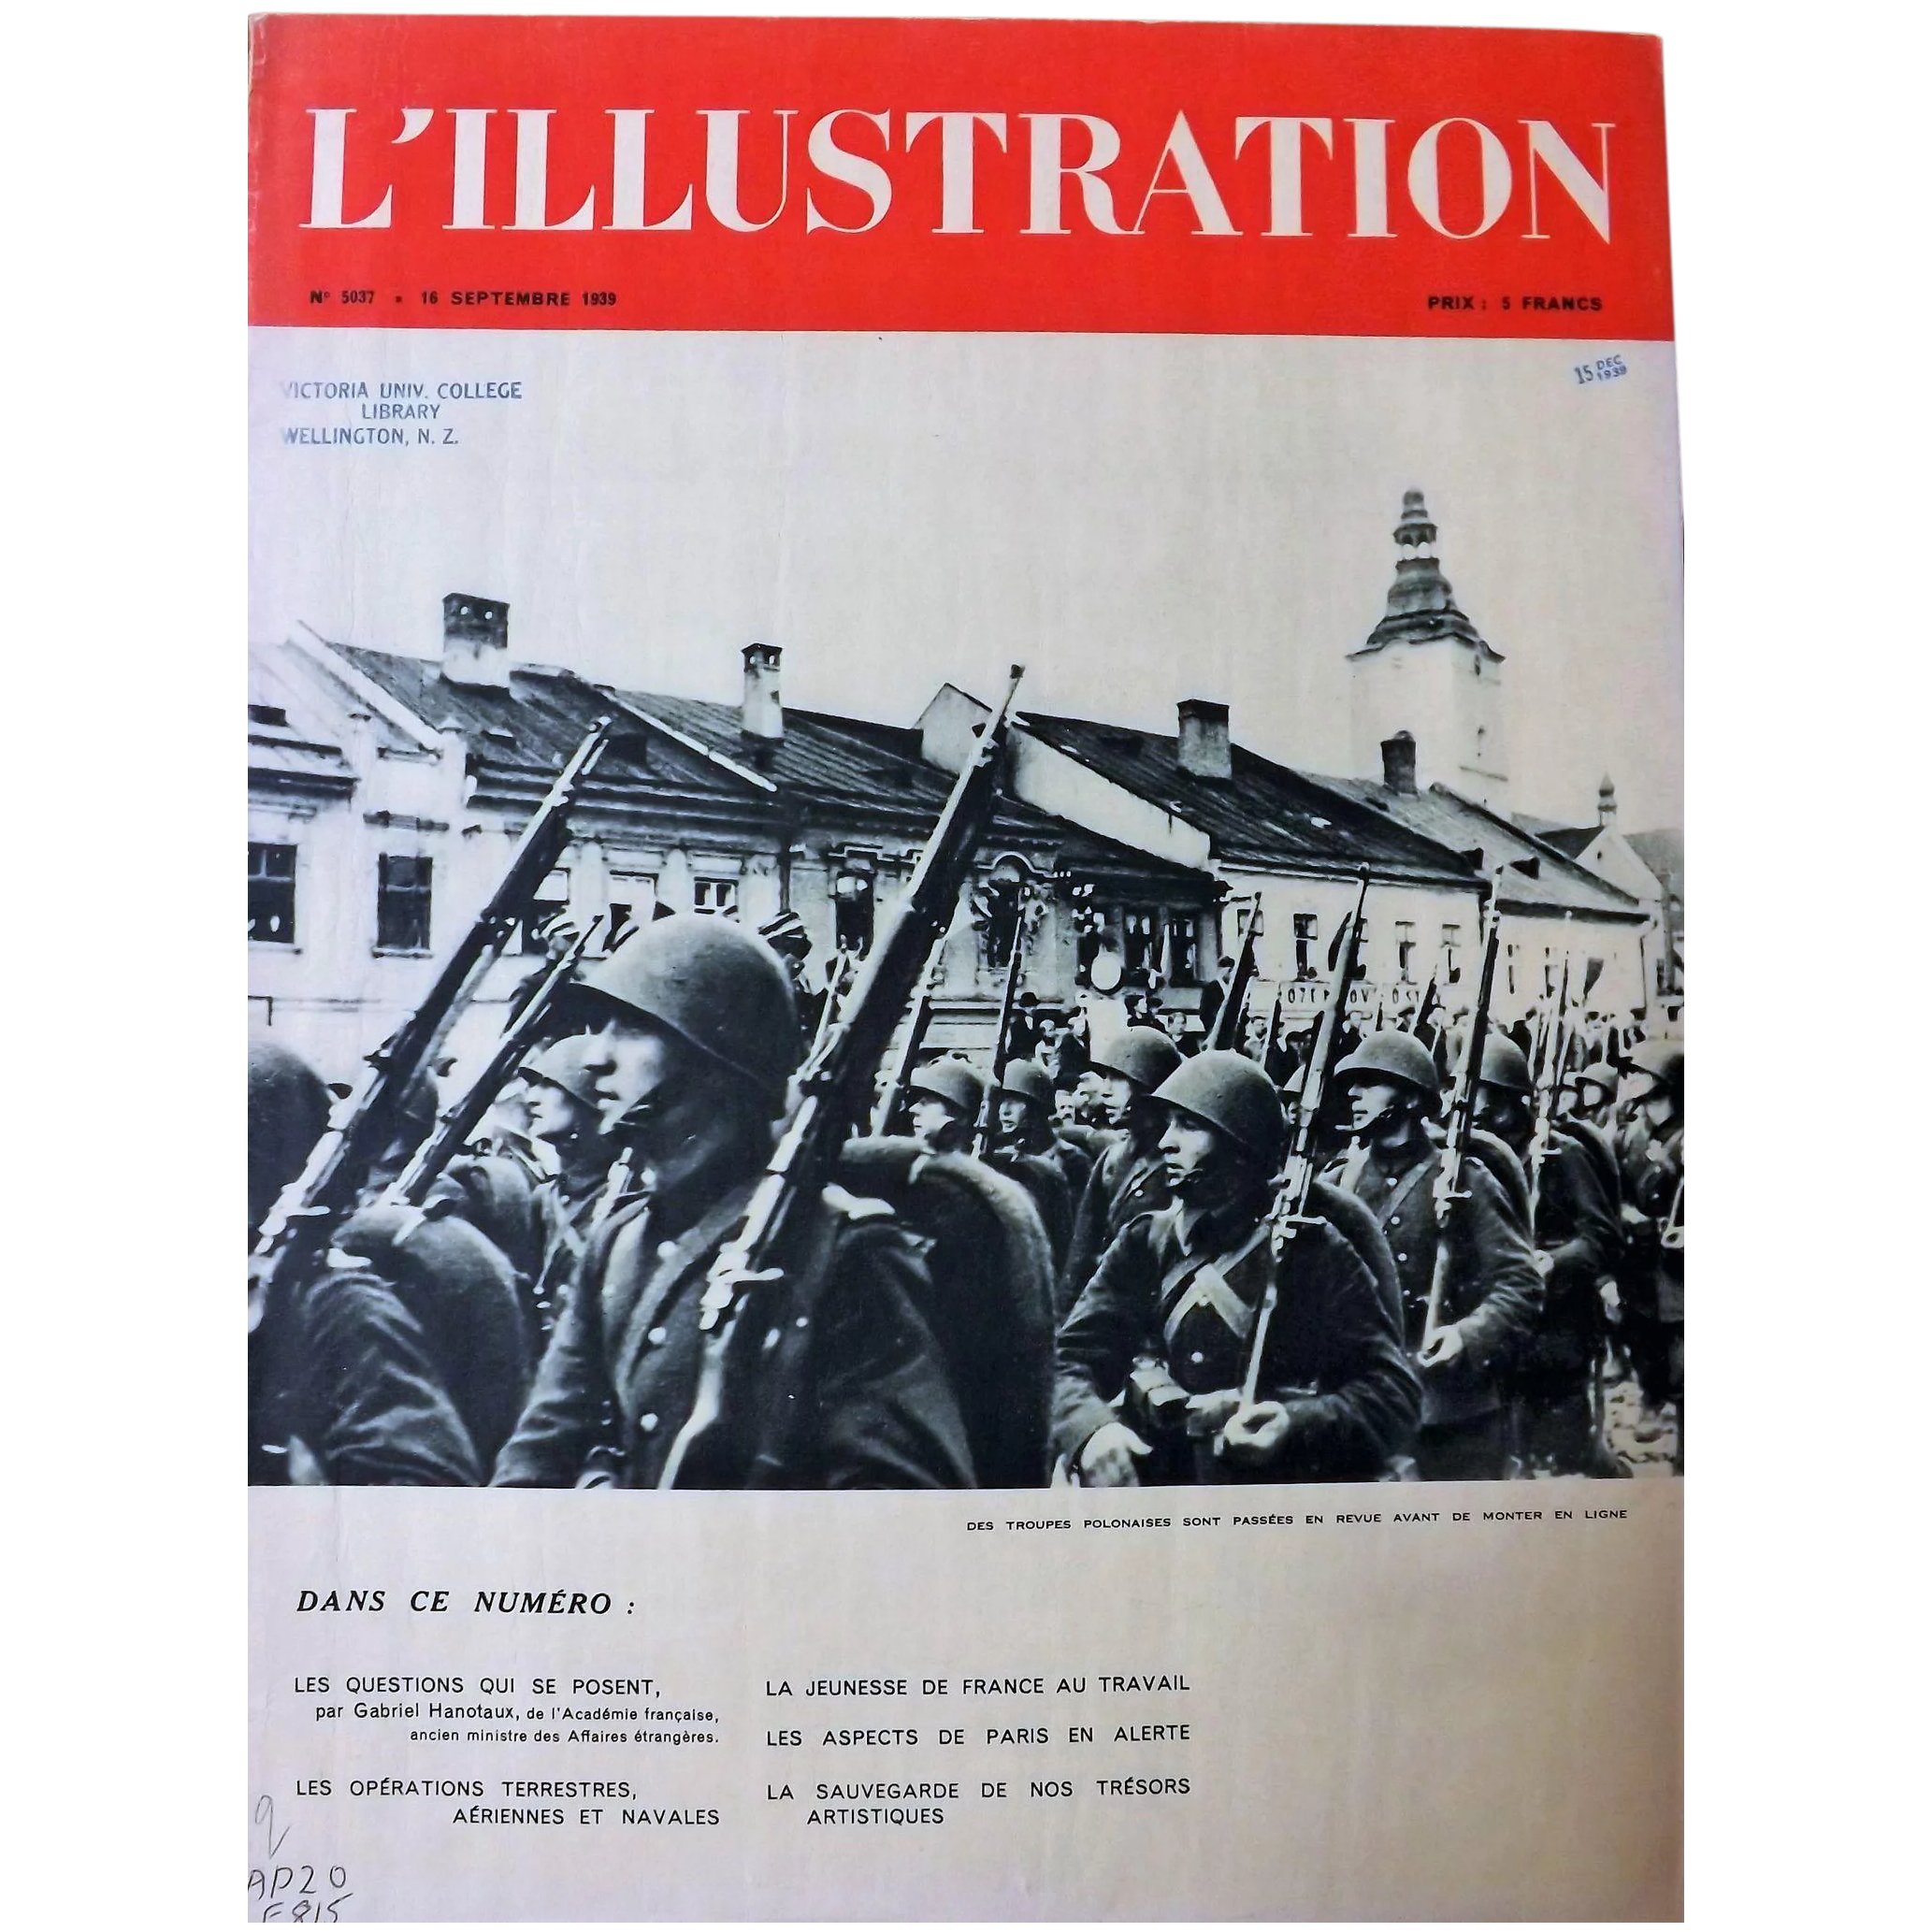 Polish Troops In September 1939 - Front Cover From L 'Illustration Magazine